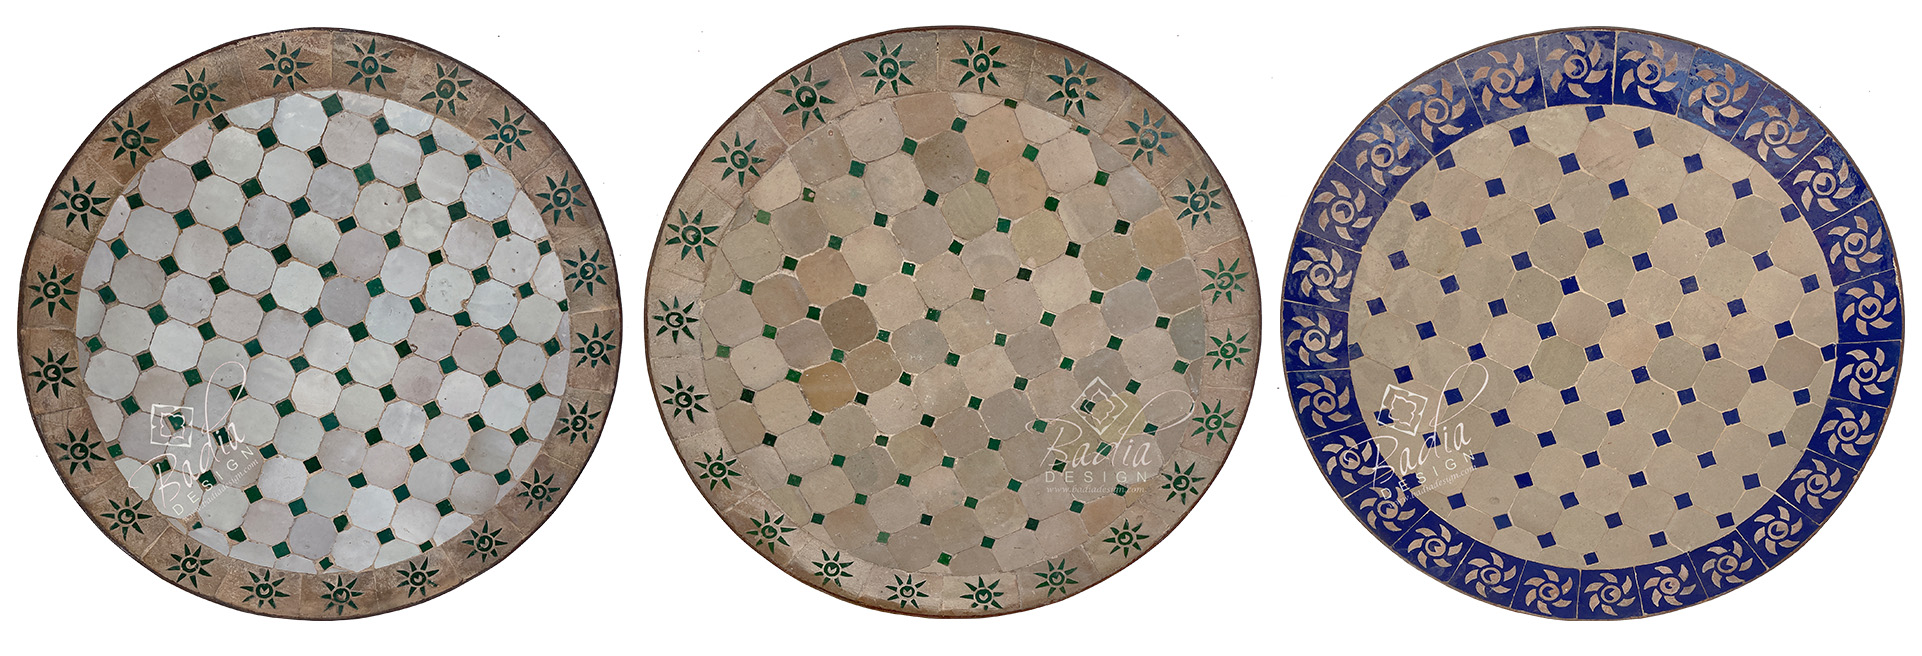 moroccan-tile-tables-for-sale-mtr519.jpg